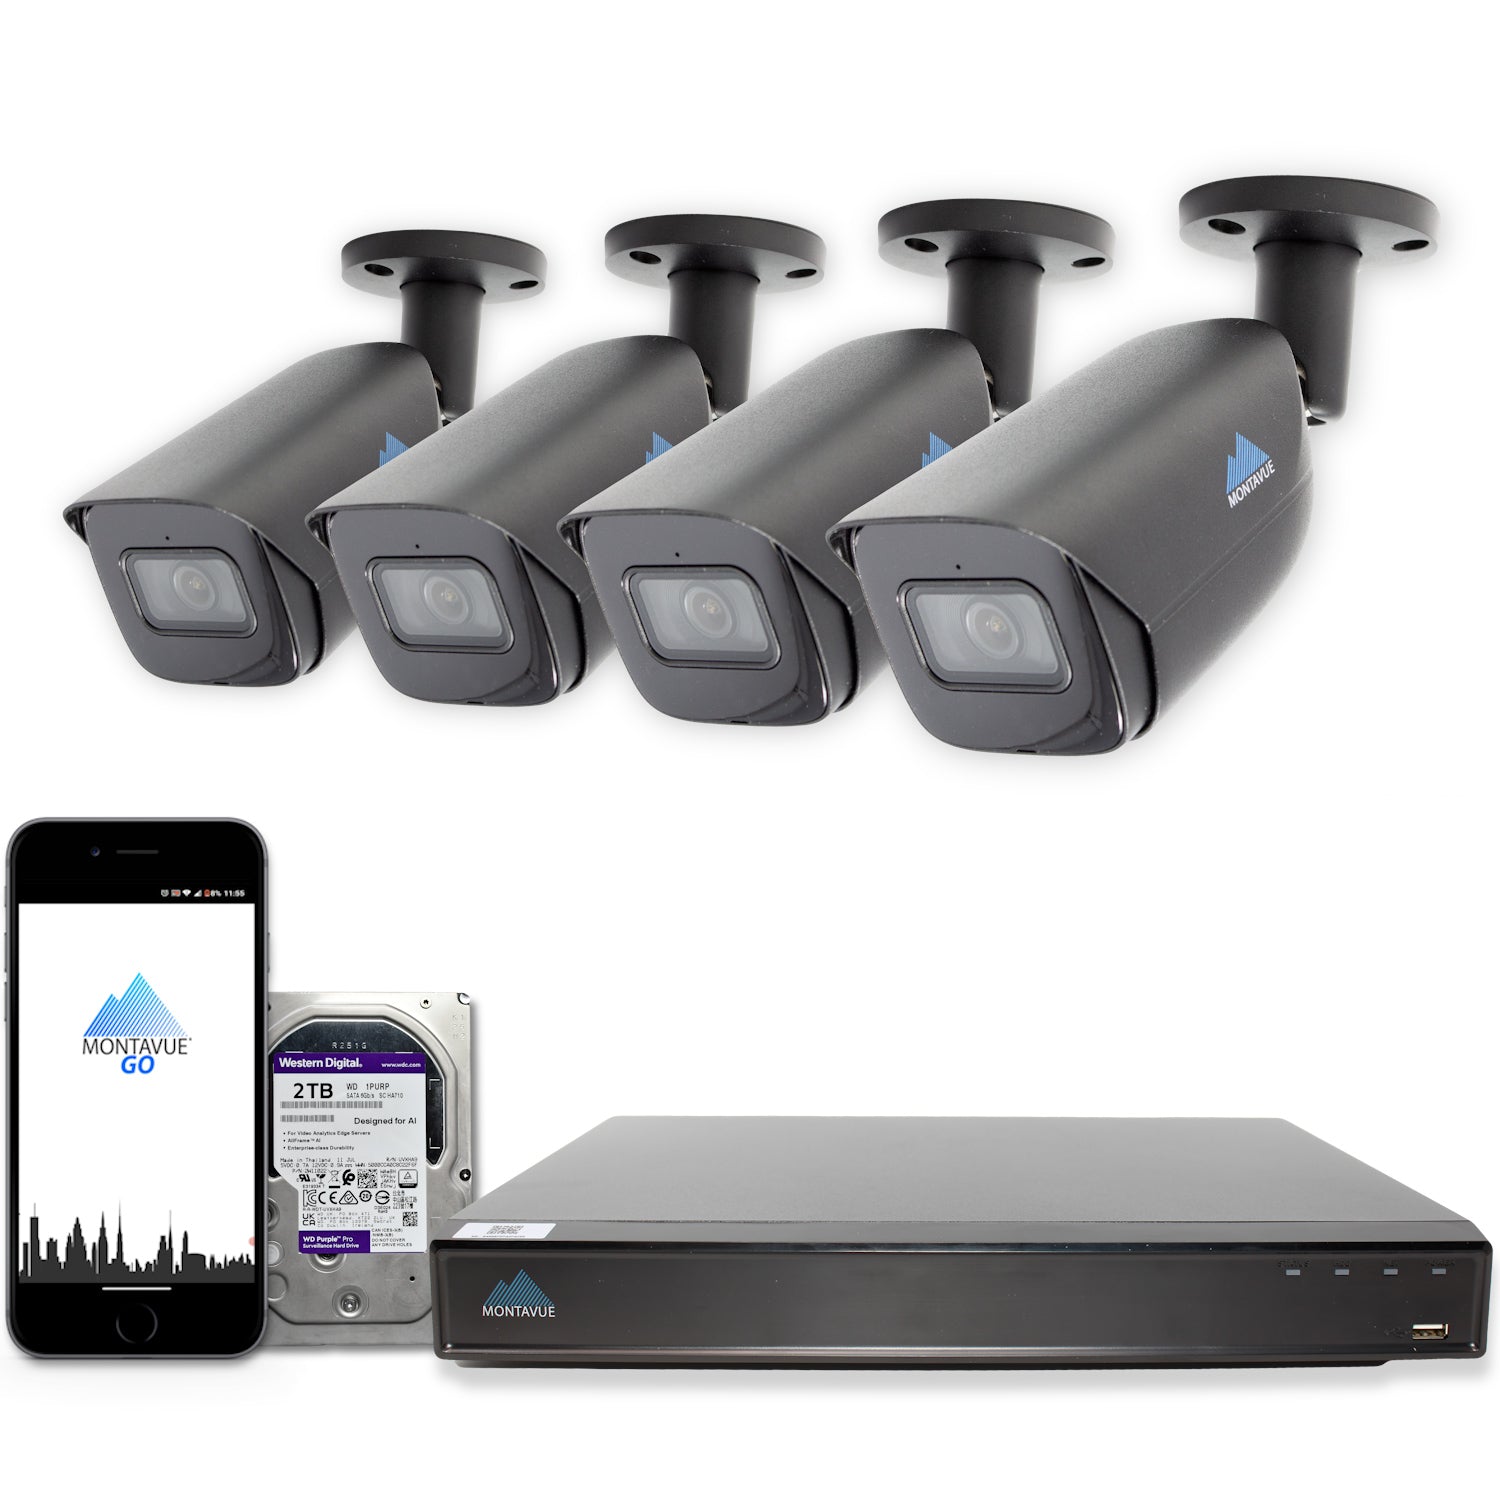 8MP Smart Motion AI Bullet Camera Security System w/ 8 Channel NVR and 2TB Hard Drive - MTB8108-AISMD-X - Montavue